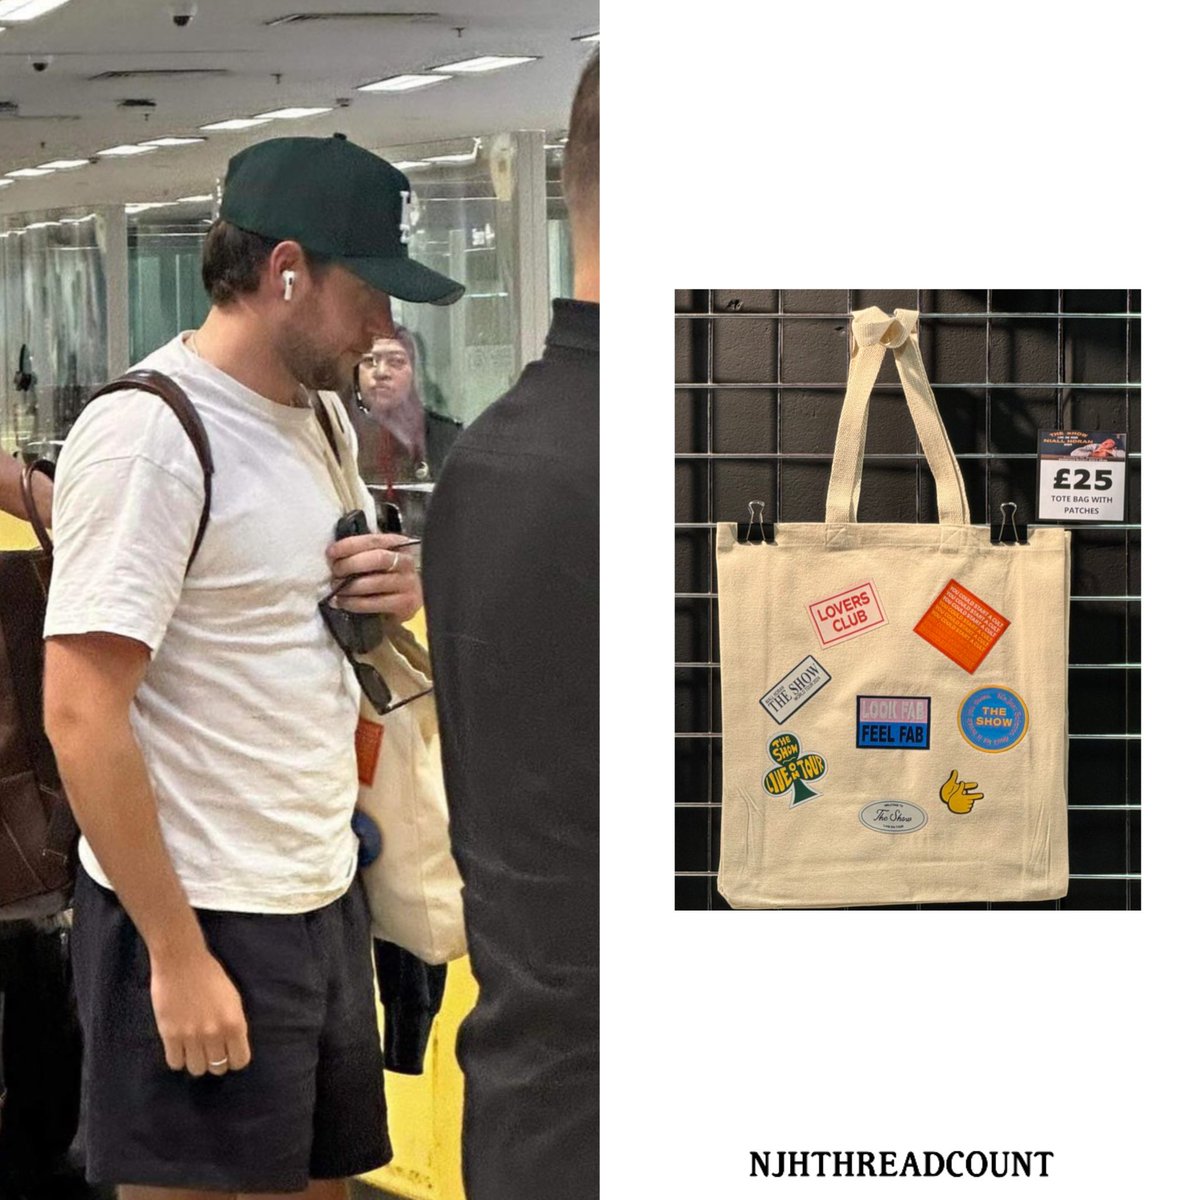 Niall Horan wearing a Niall Horan tote bag with patches (£25) 

(available at TSLOT merch stands)